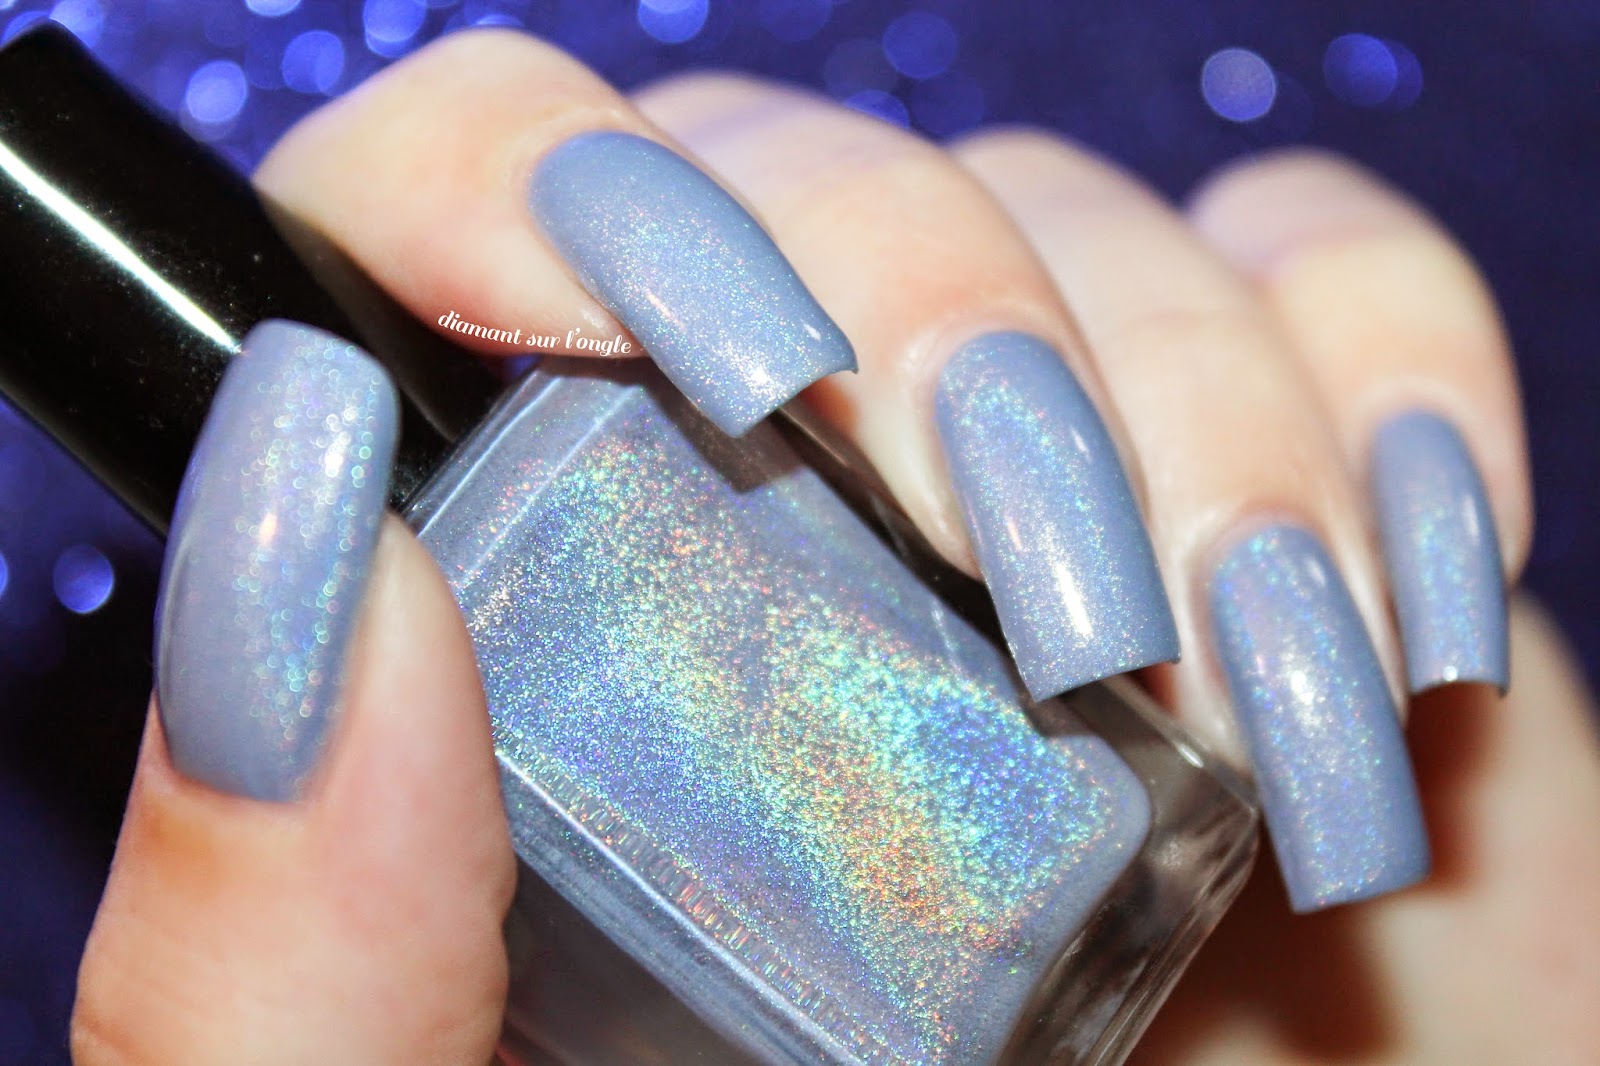 Swatch of April 2014 by Enchanted Polish